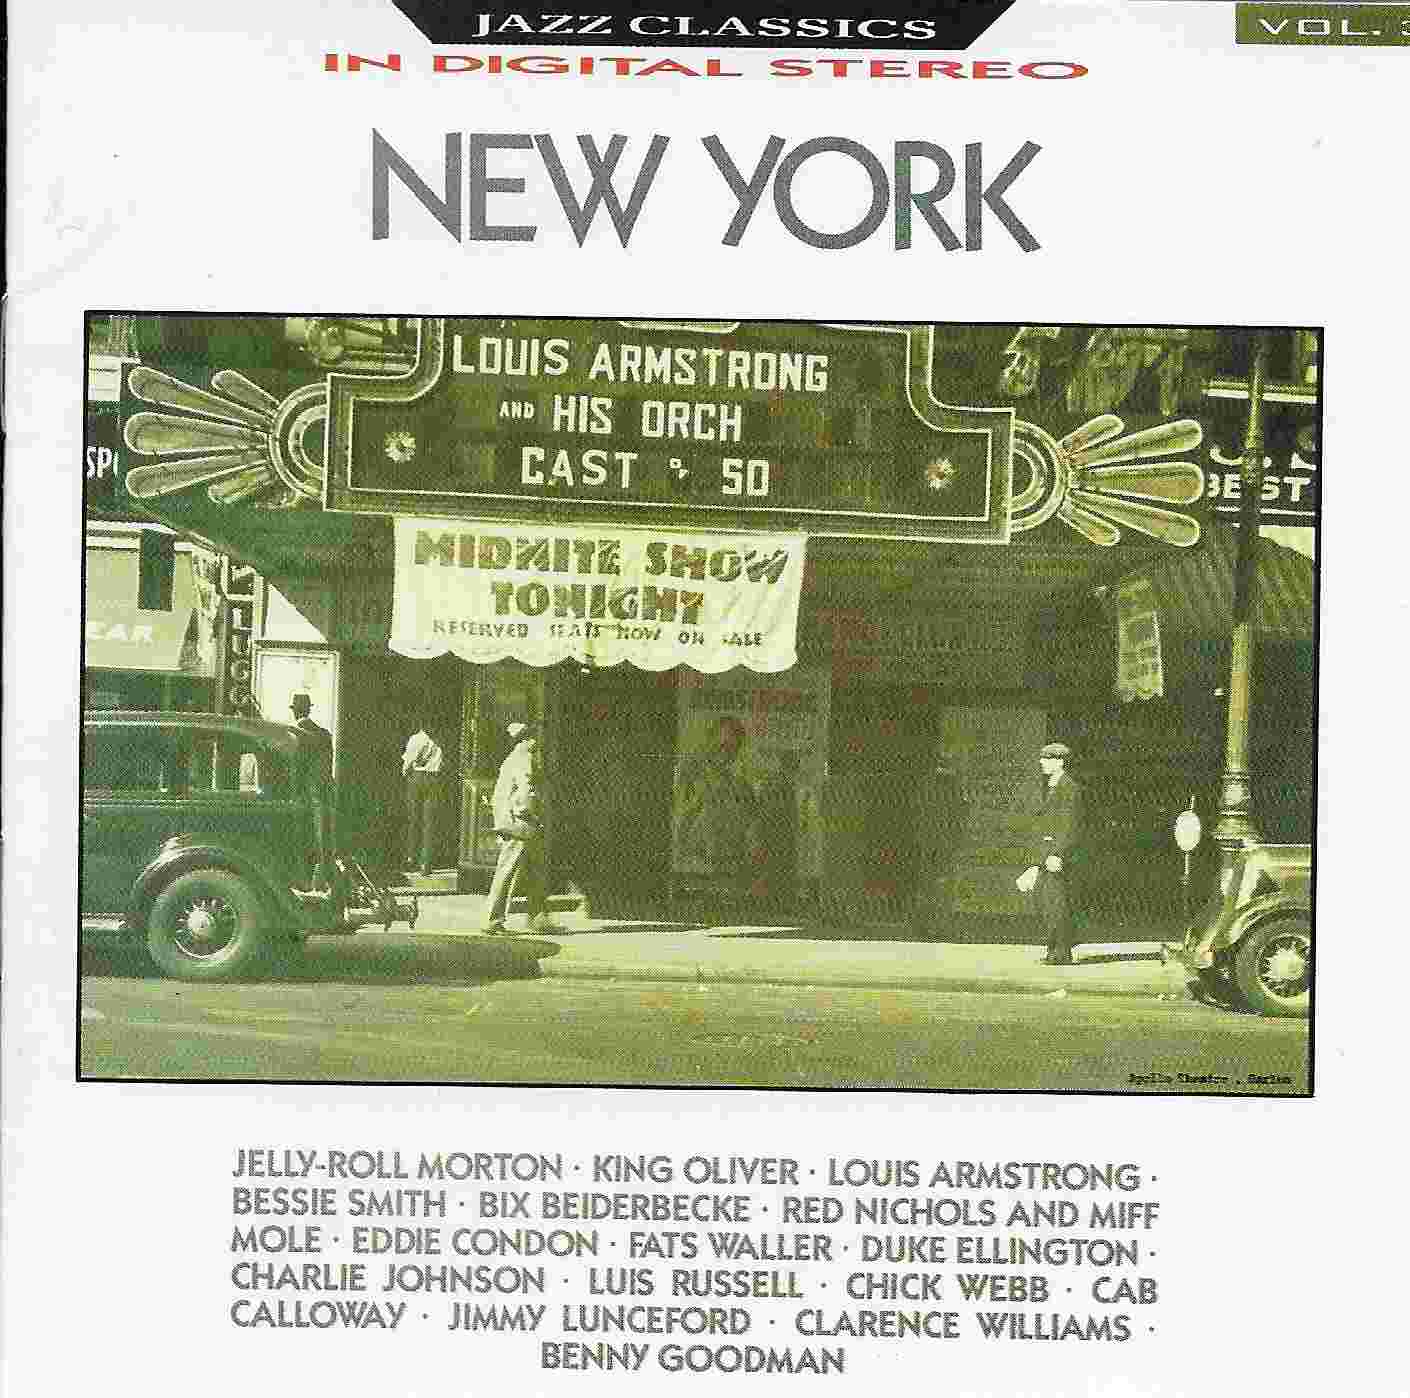 Picture of Jazz Classics - Volume 3, New York by artist Various from the BBC cds - Records and Tapes library